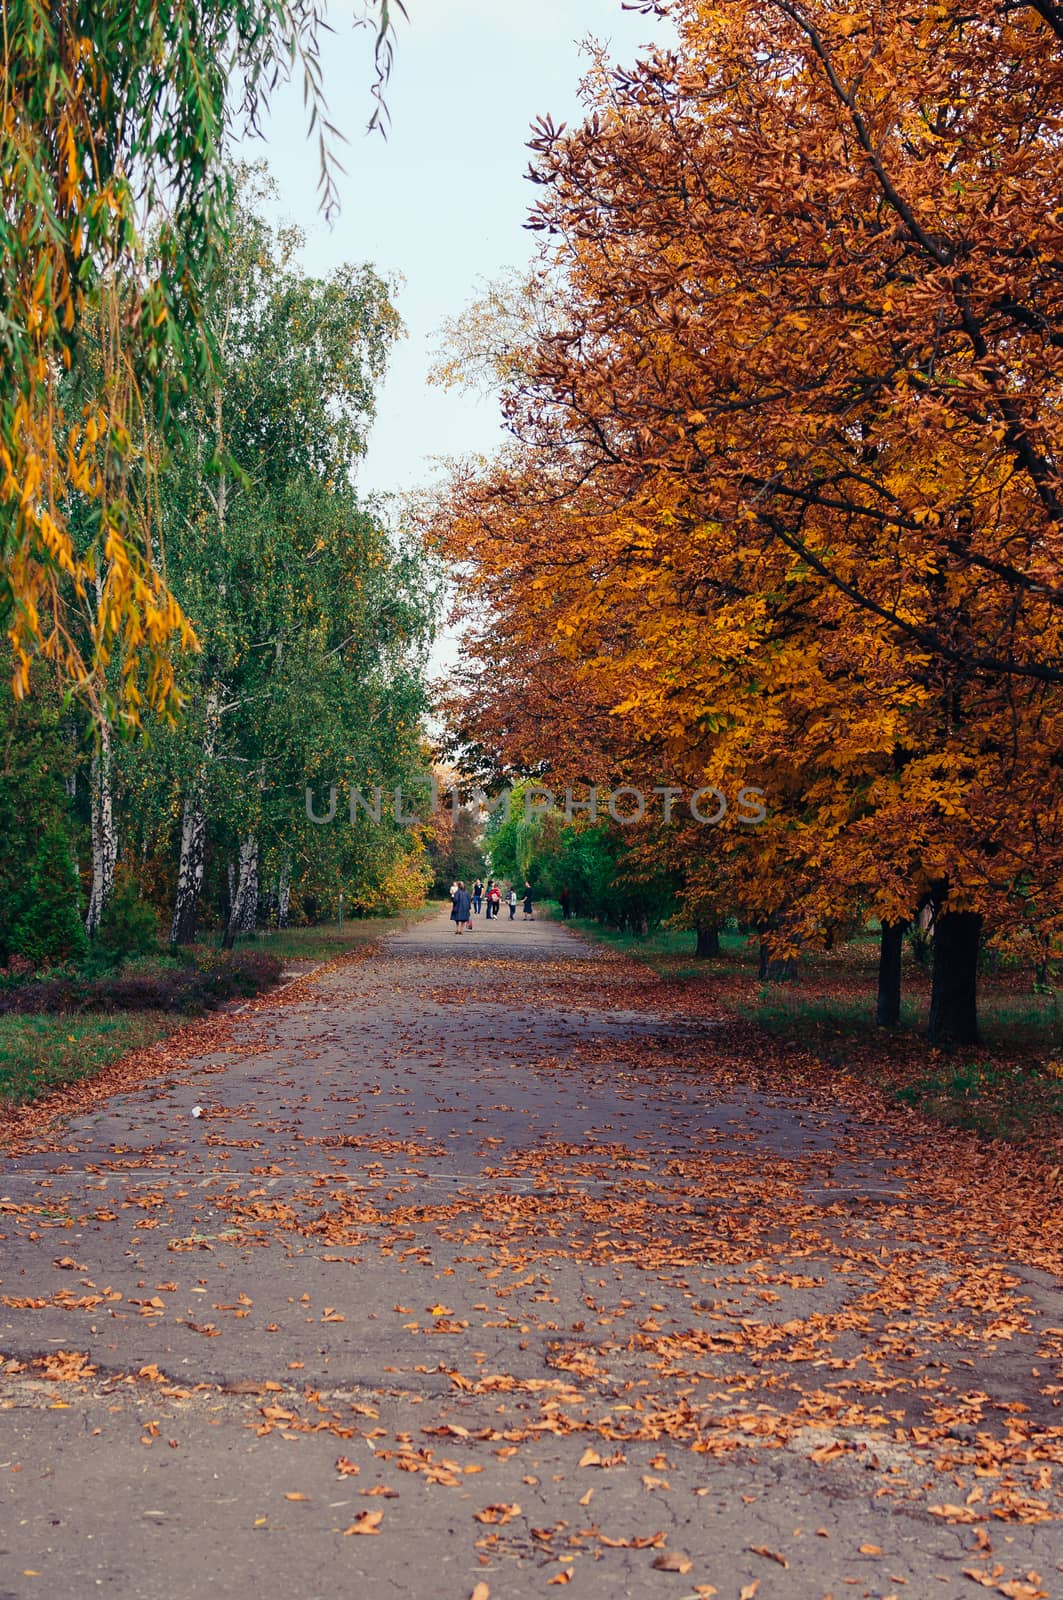 Autumn sunny landscape. The road to the autumn park with trees and fallen autumn leaves on the ground in the park on a sunny October day. Template for design. Copy space. by Alla_Morozova93